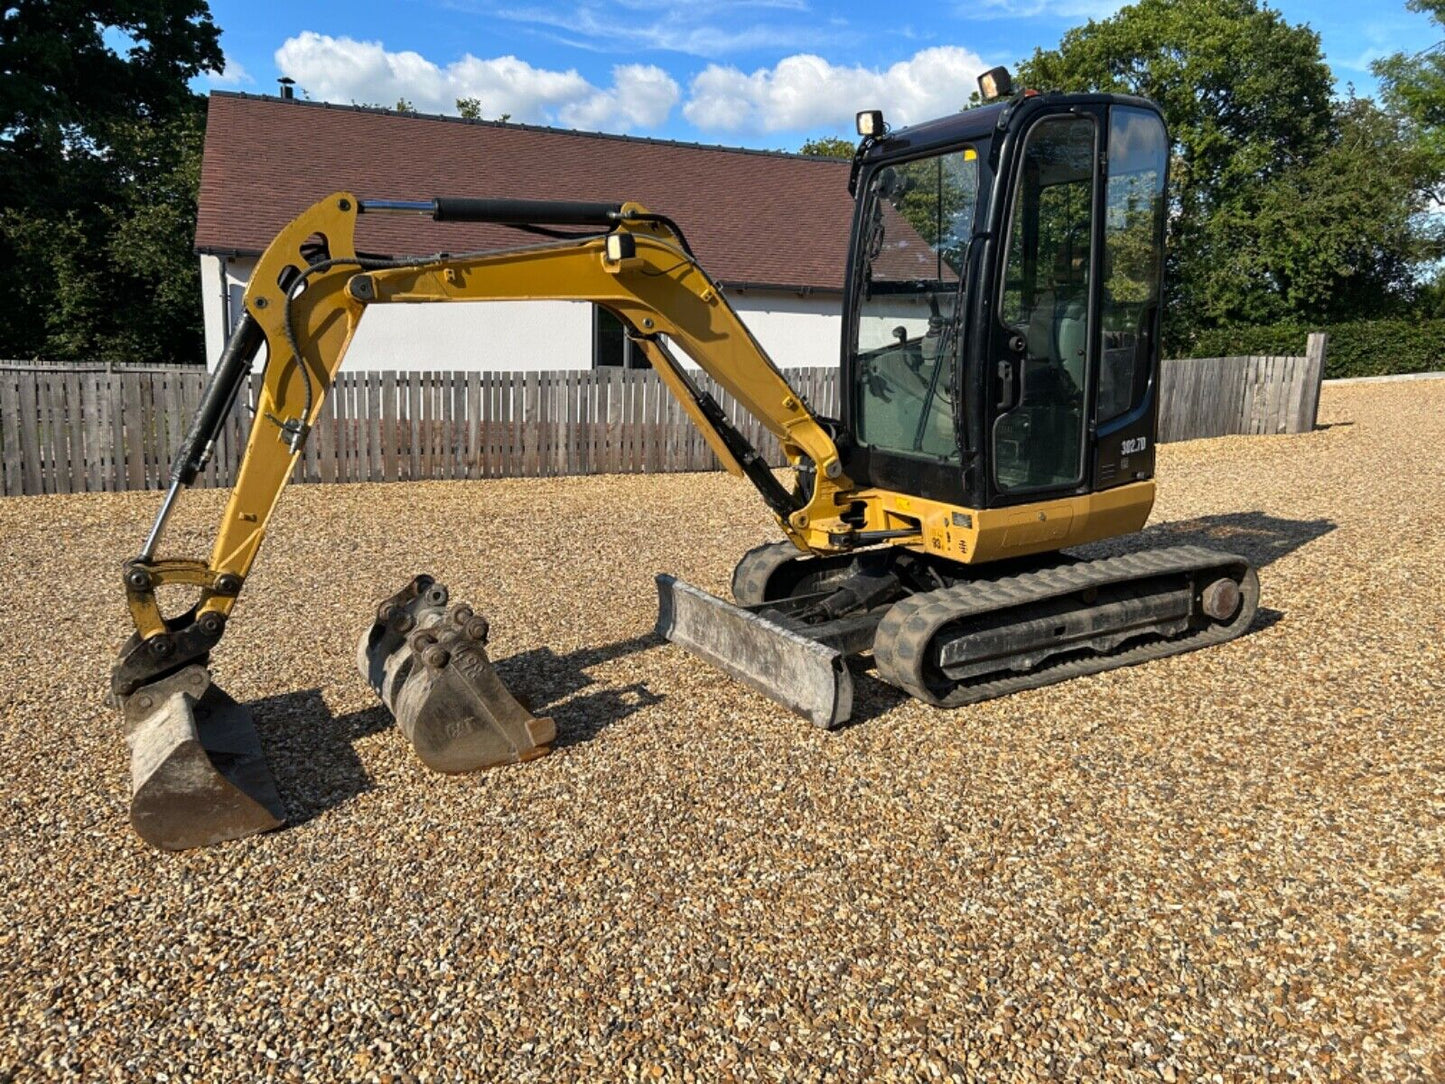 Bid on DEPENDABLE WORKHORSE: CAT 302.7 3-TON DIGGER FOR SALE- Buy &amp; Sell on Auction with EAMA Group